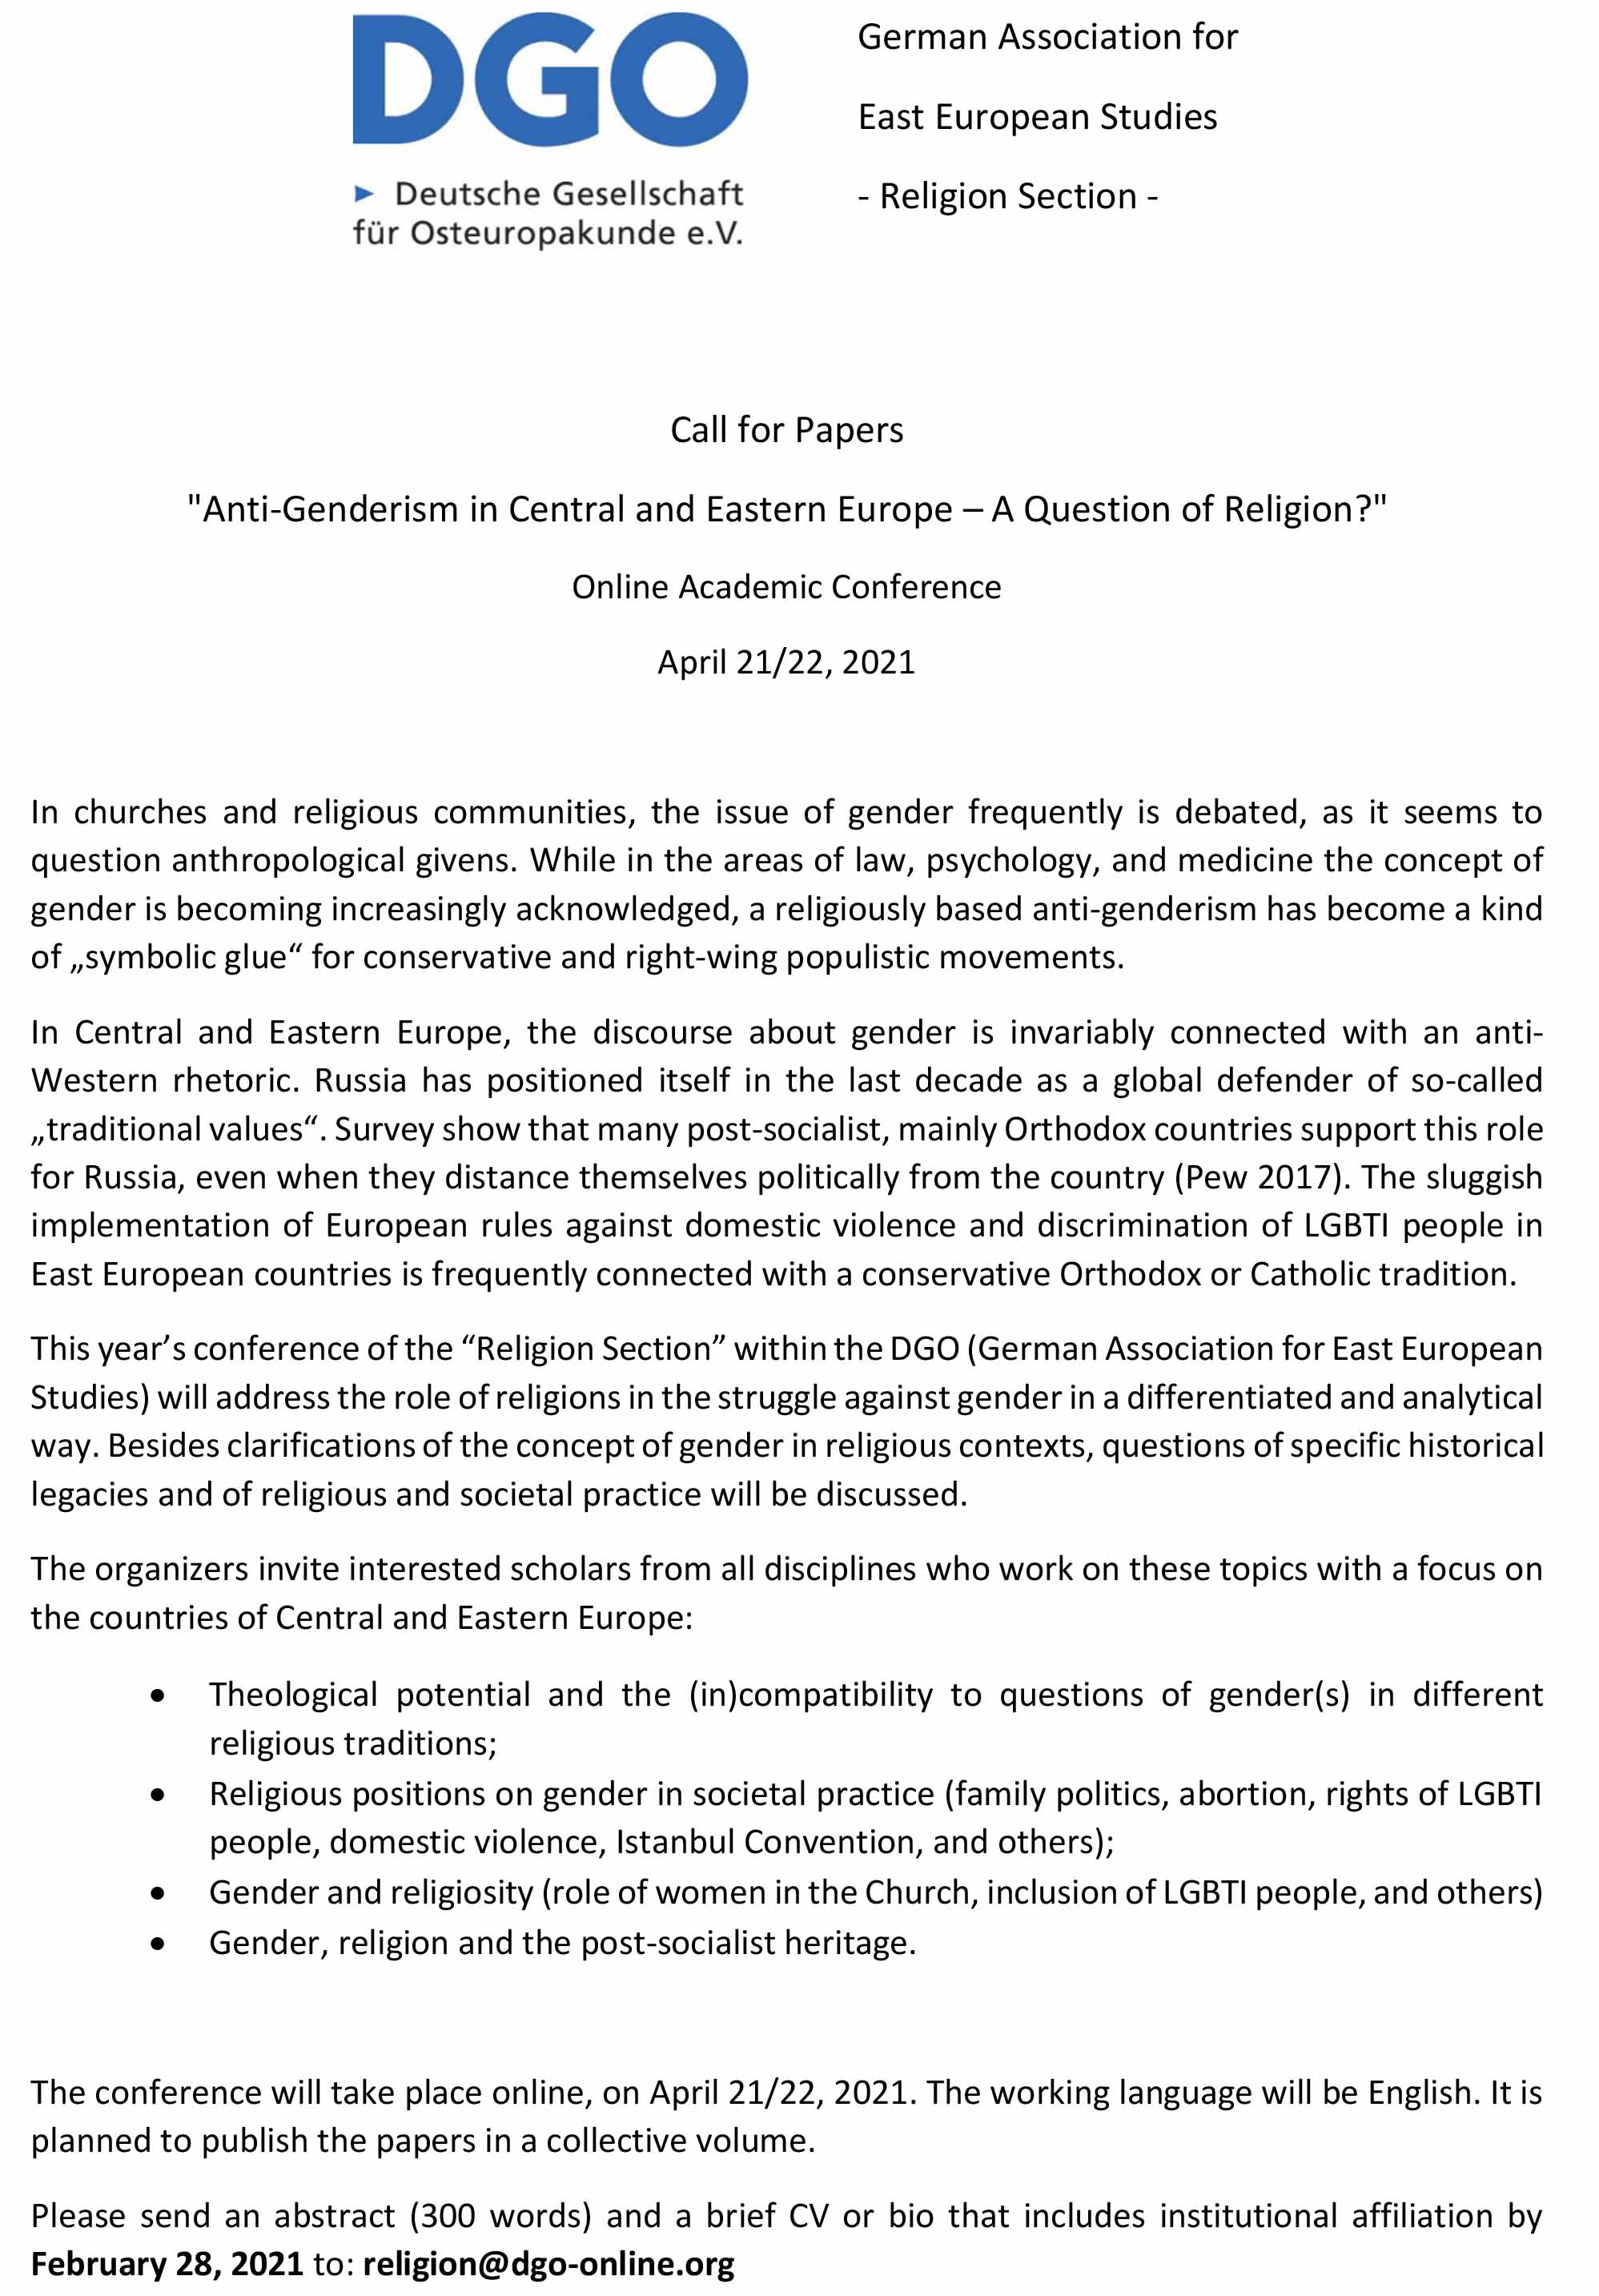 CfP Ant Genderism in Central and Eastern Europe